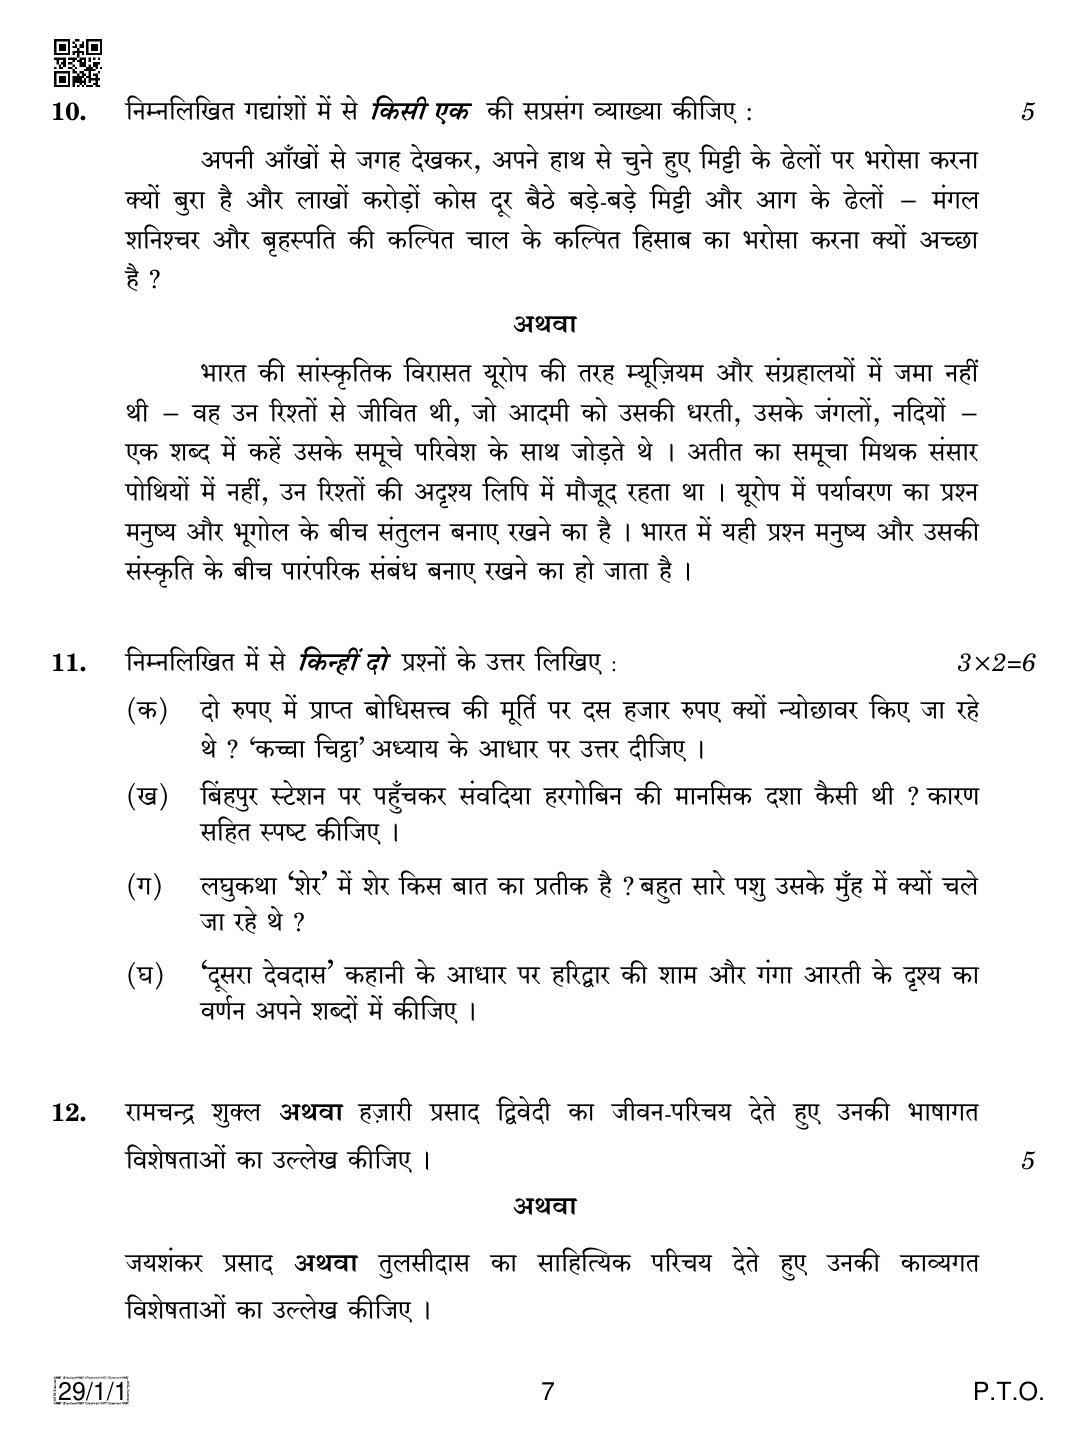 CBSE Class 12 29-1-1 HINDI ELECTIVE 2019 Compartment Question Paper - Page 7